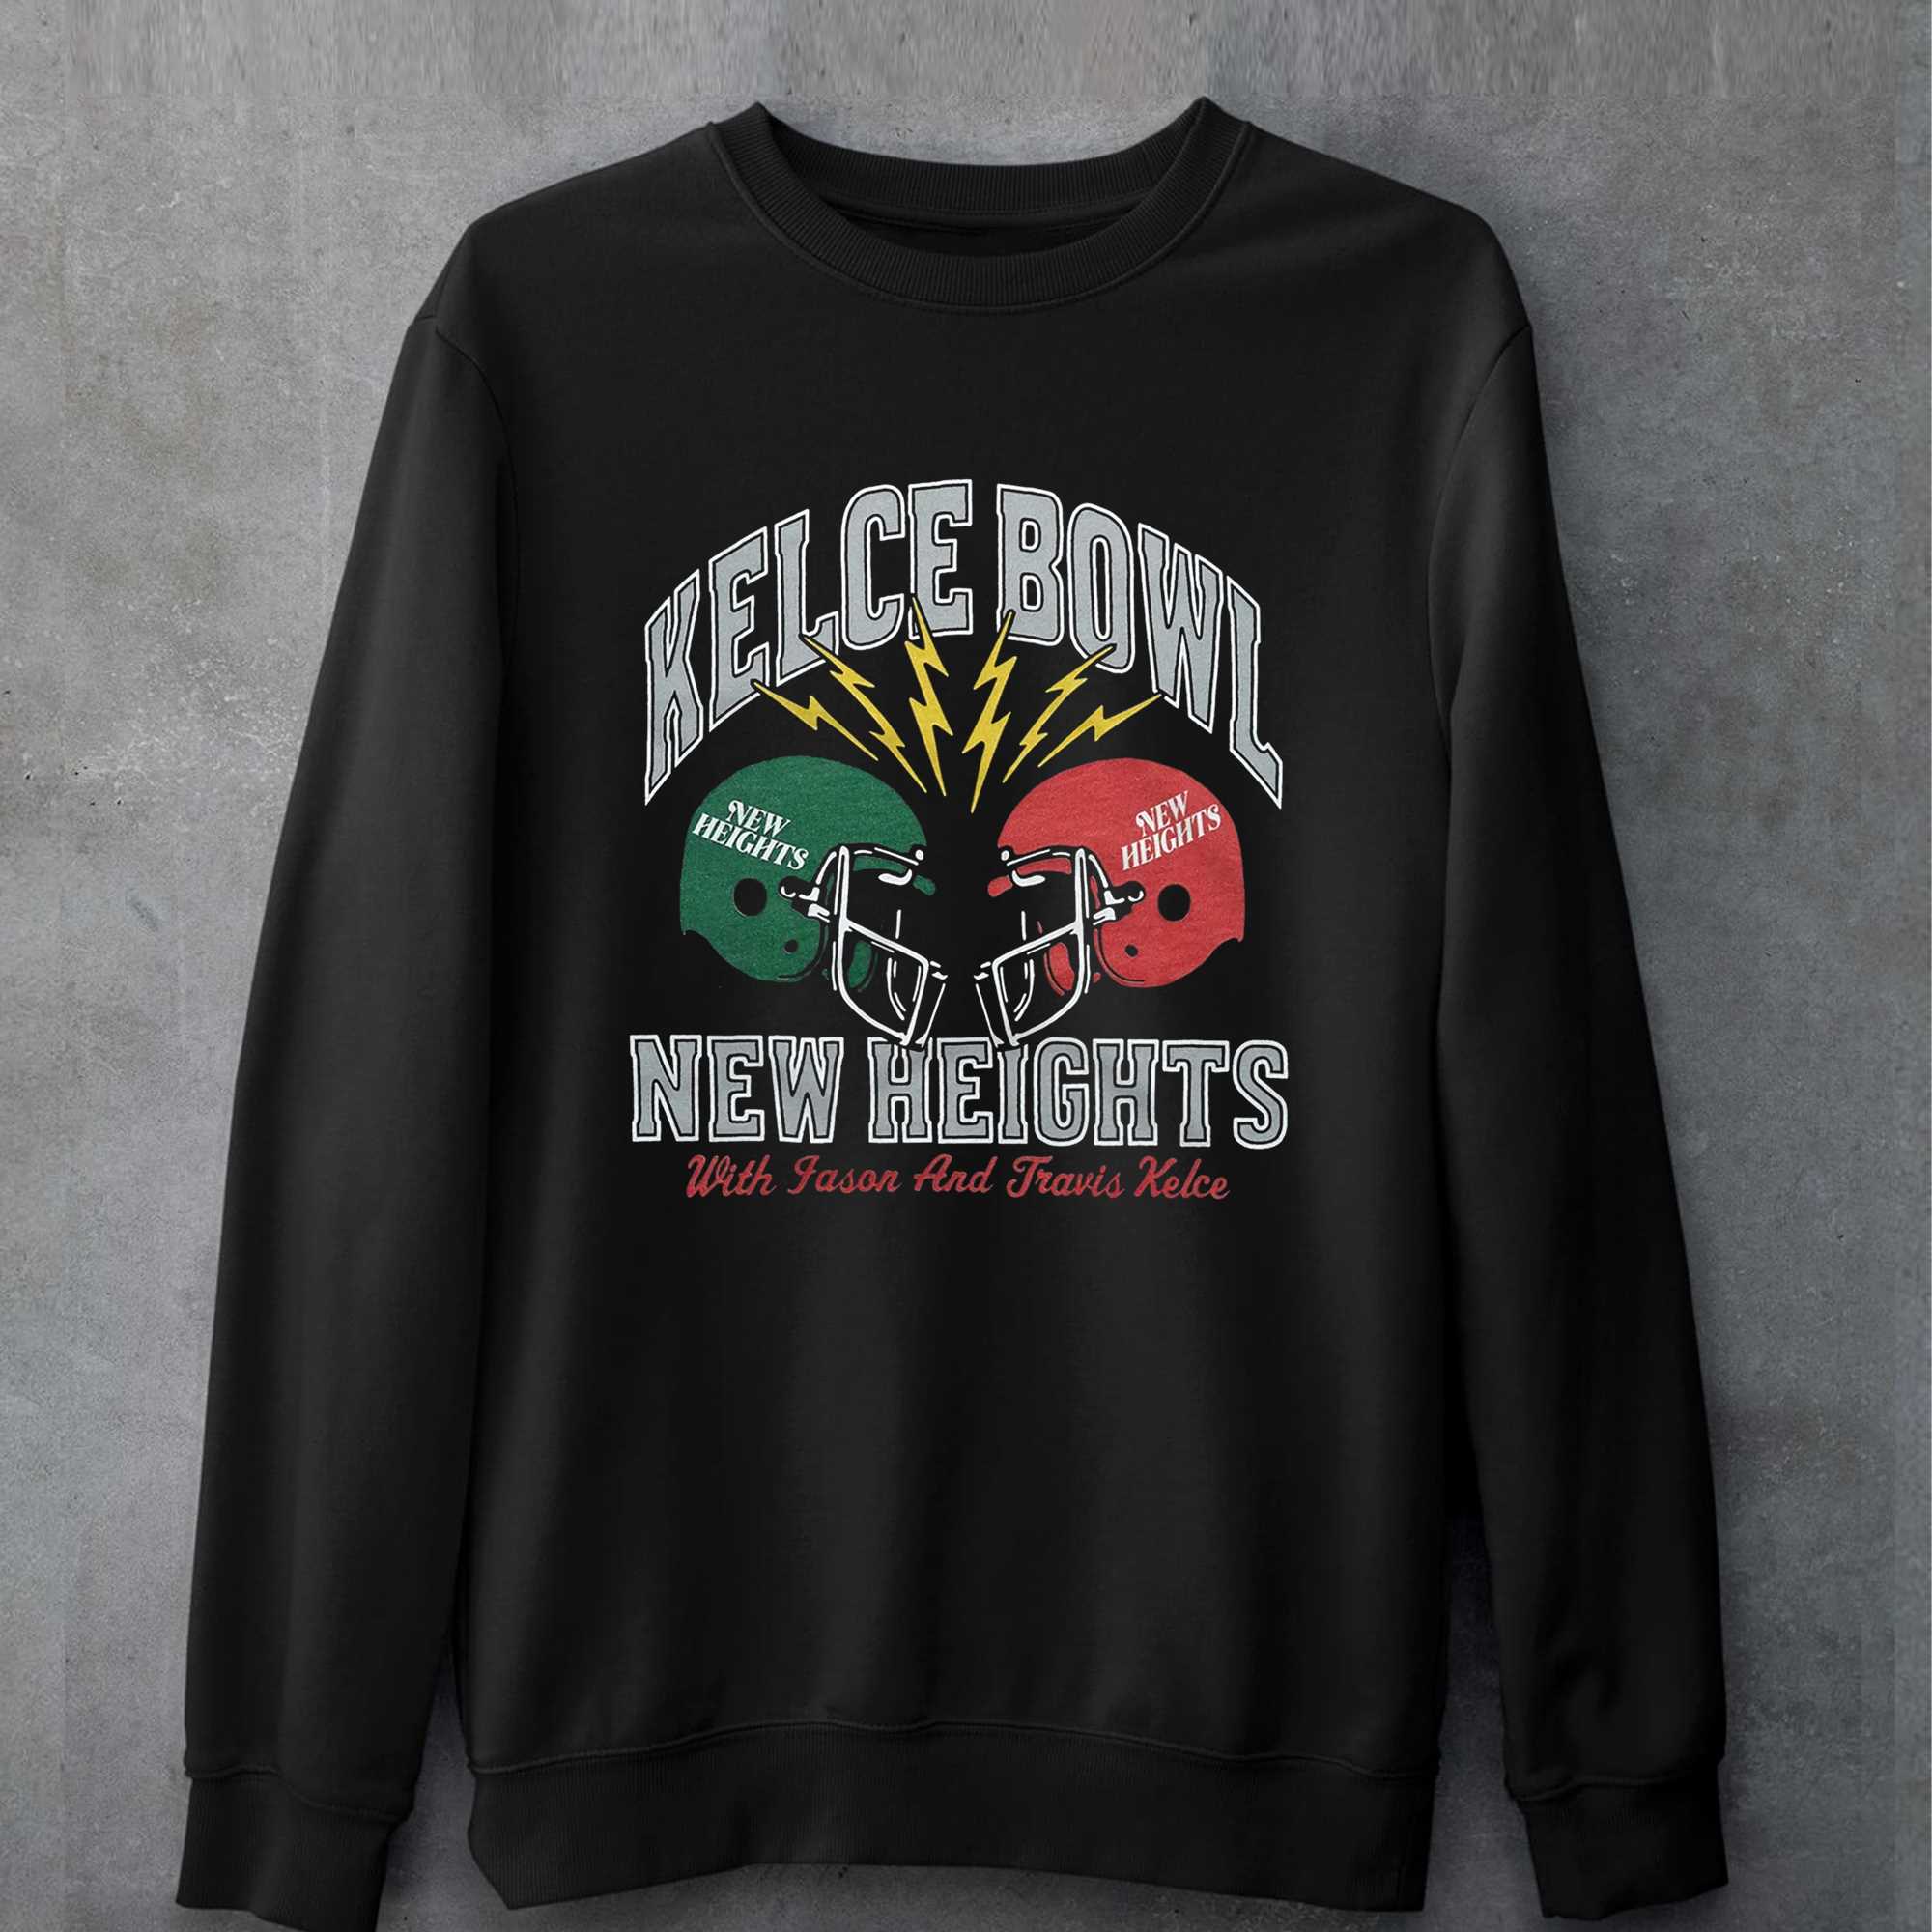 Kelce Bowl New Heights With Jason And Travis Kelce Shirt 